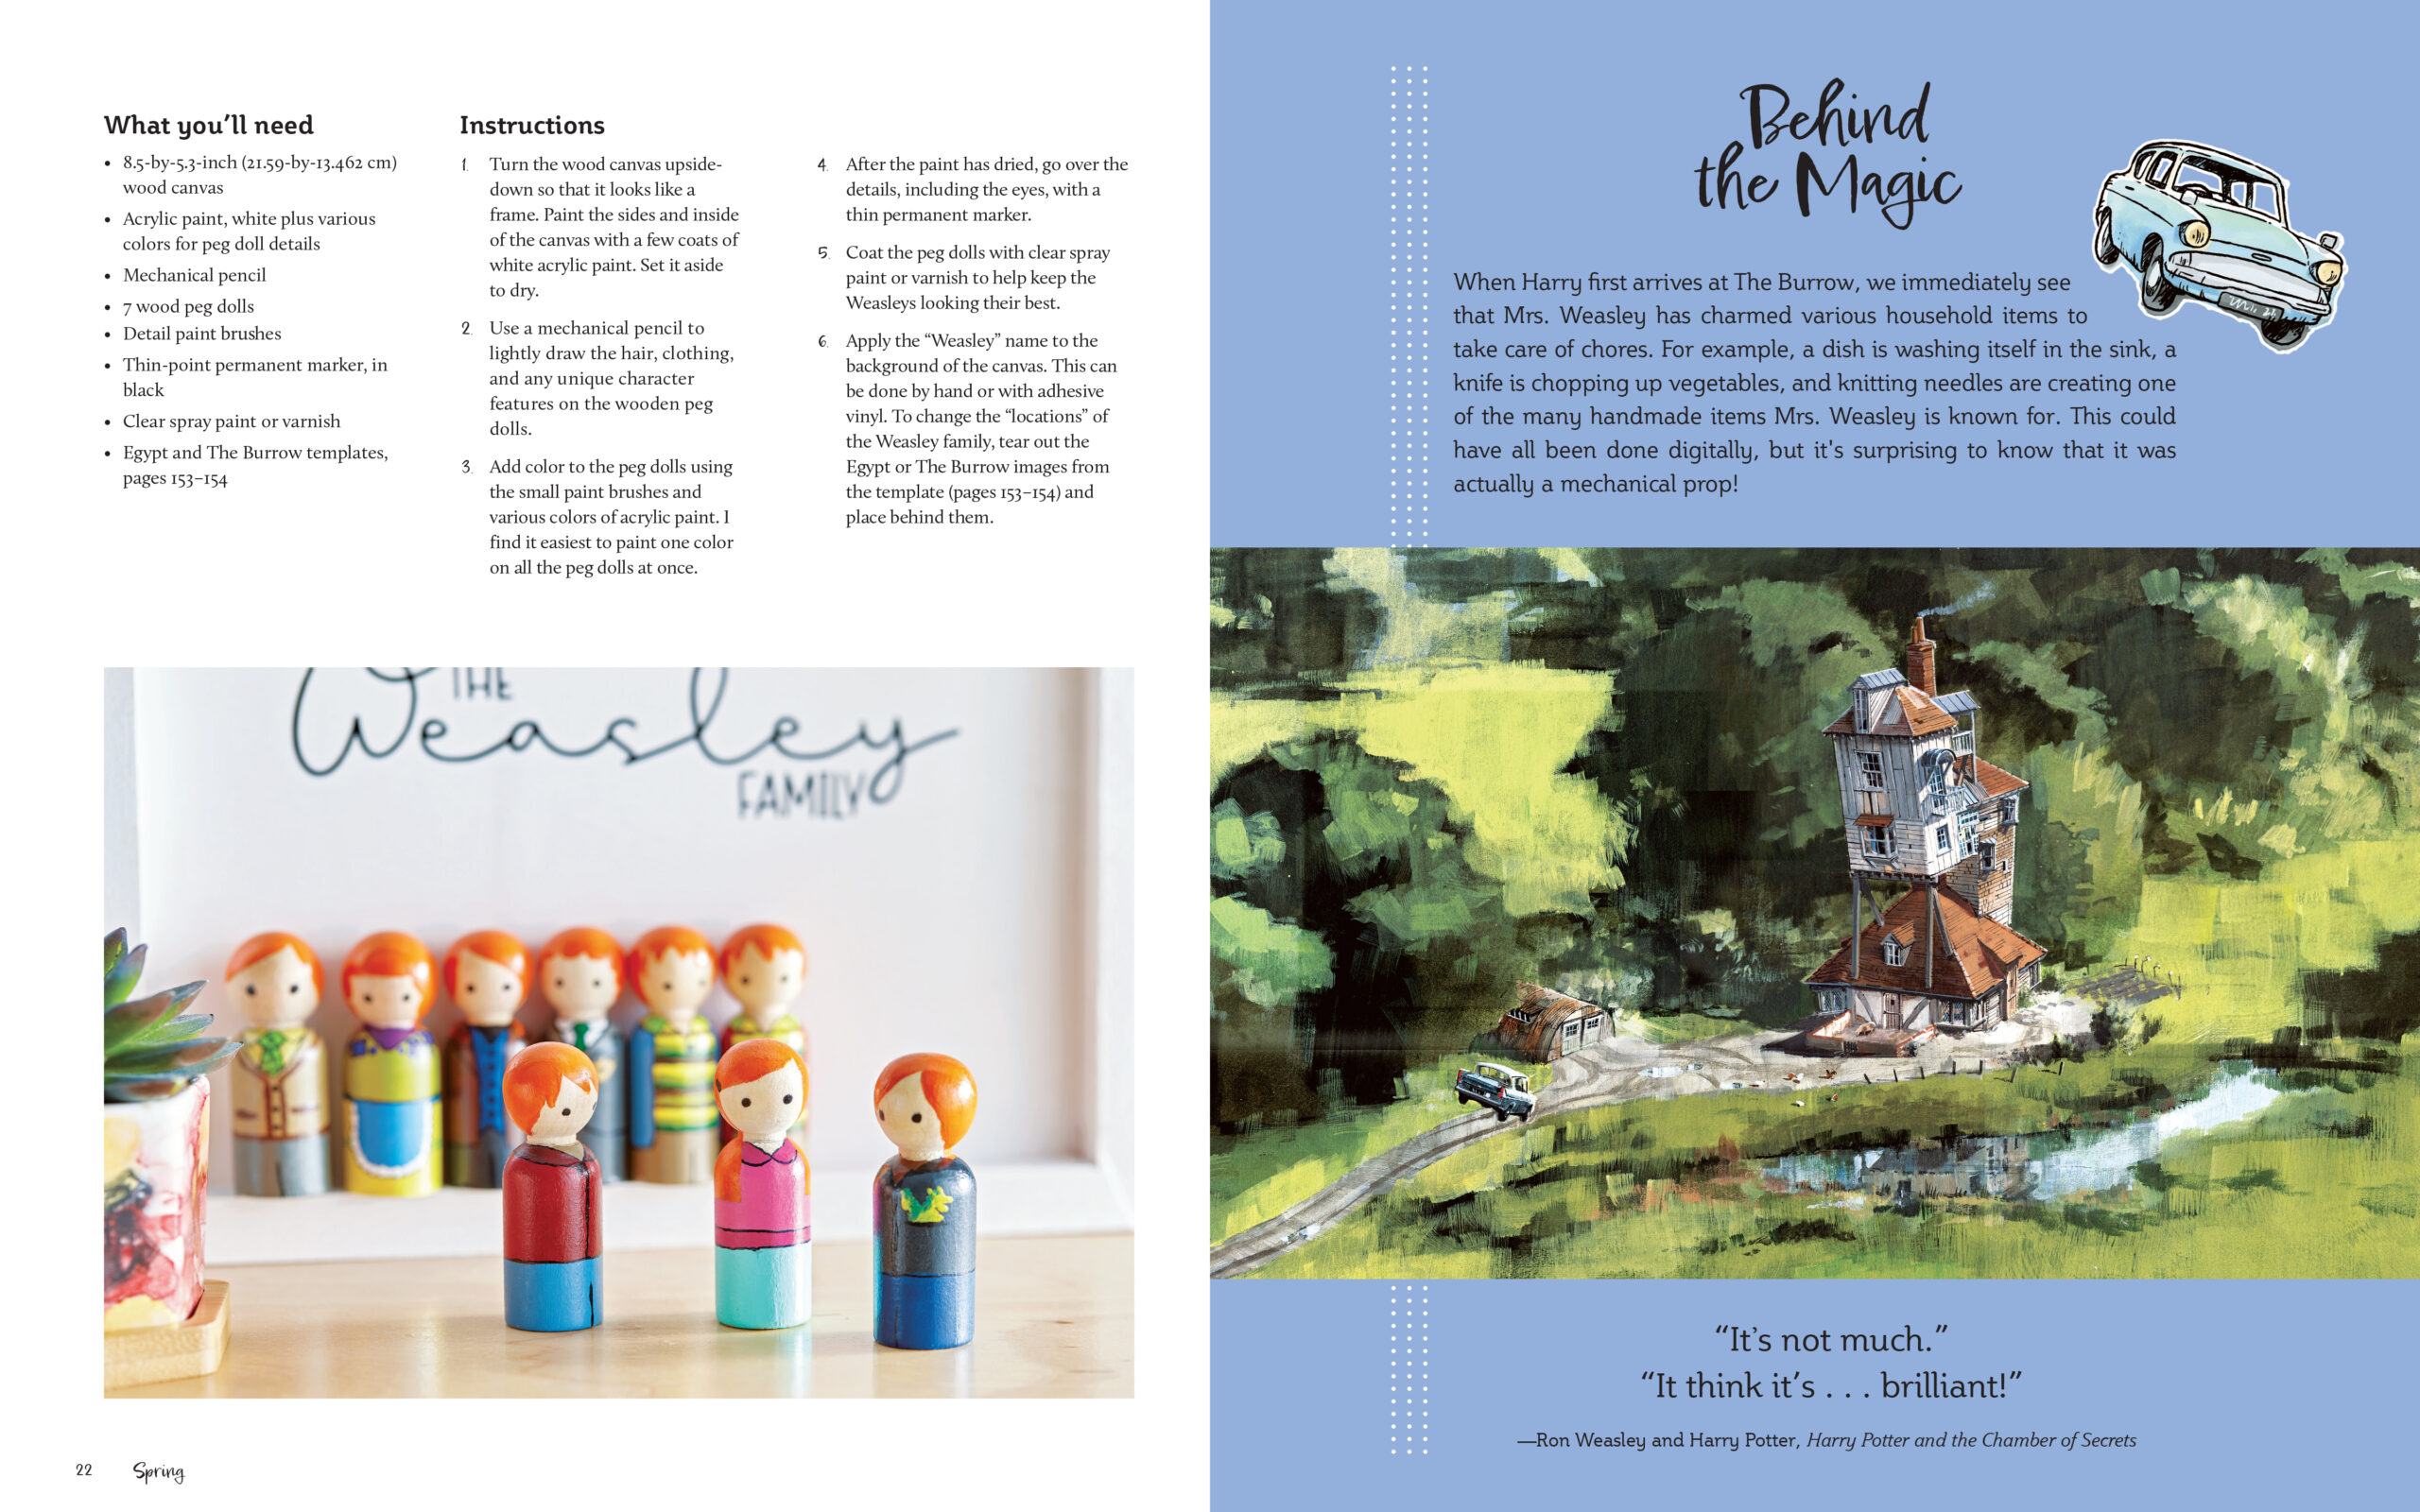 “Harry Potter: Homemade” features instructions for a Weasley family peg doll portrait.